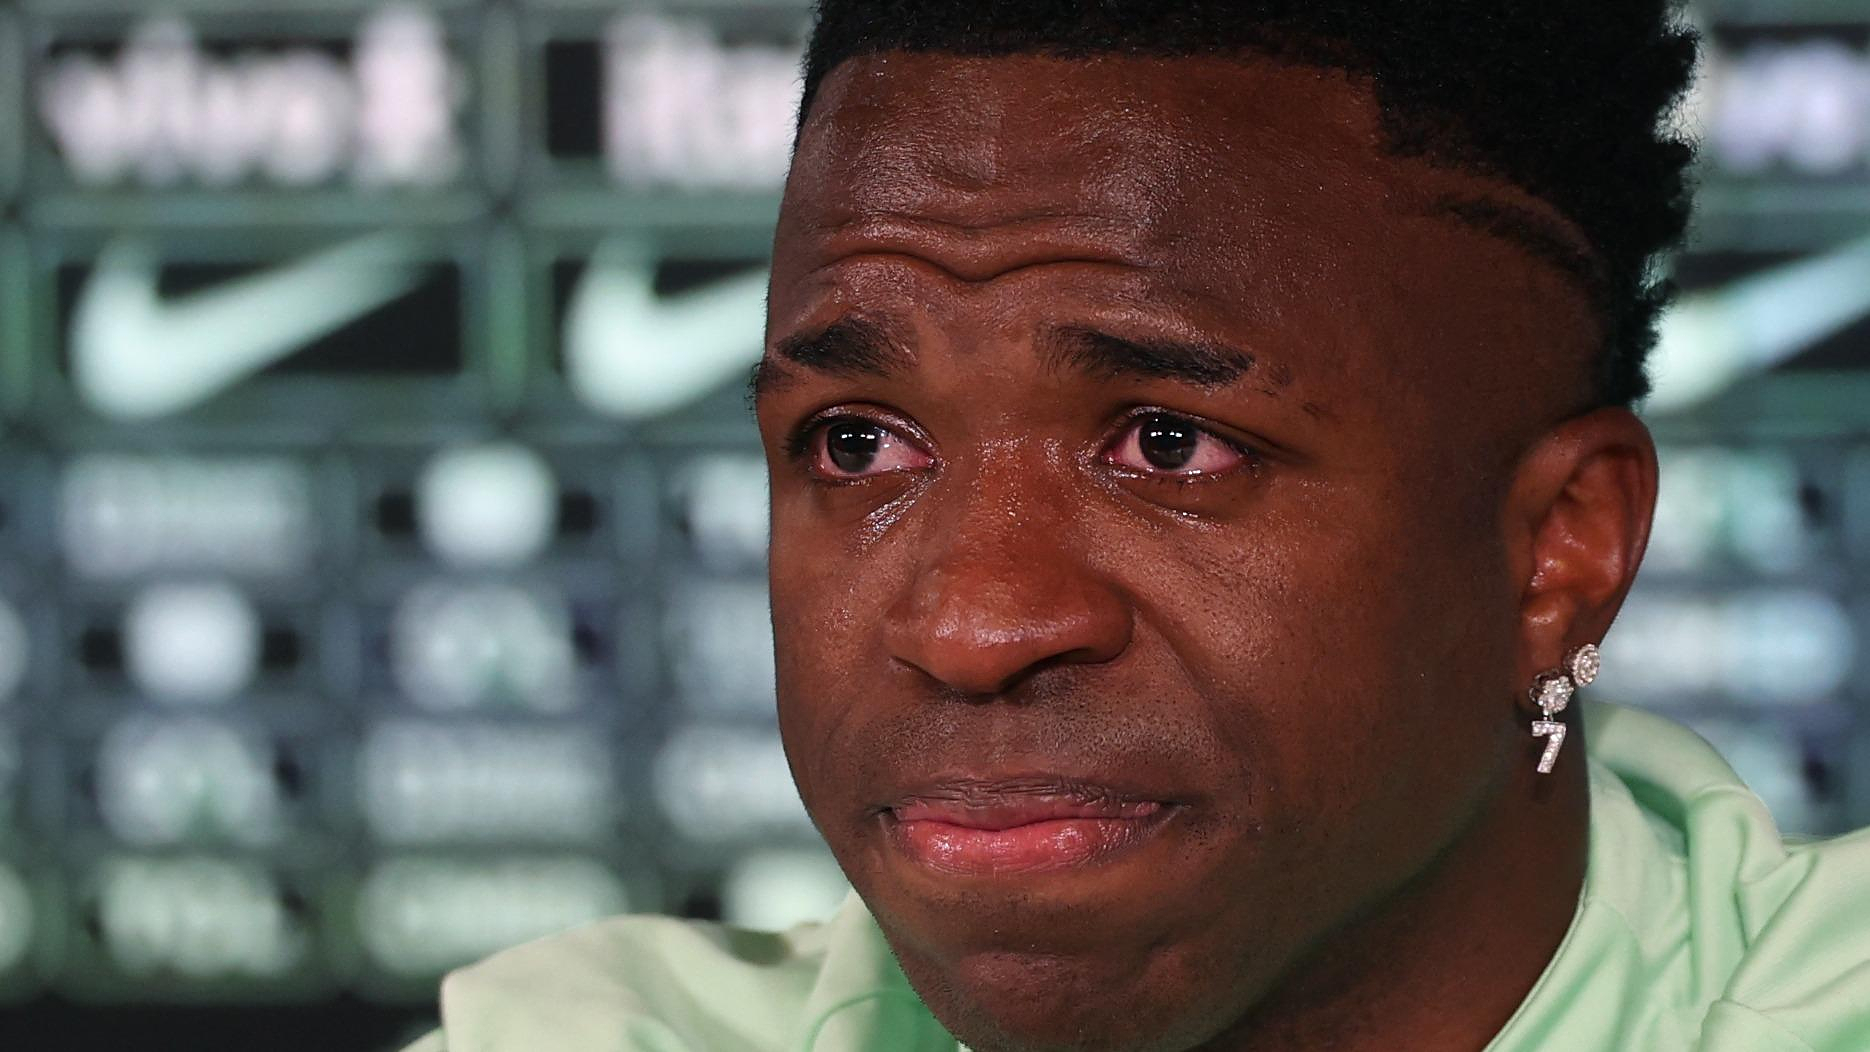 Football: “I just want to play football”, Vinicius bursts into tears while talking about the racism he is a victim of